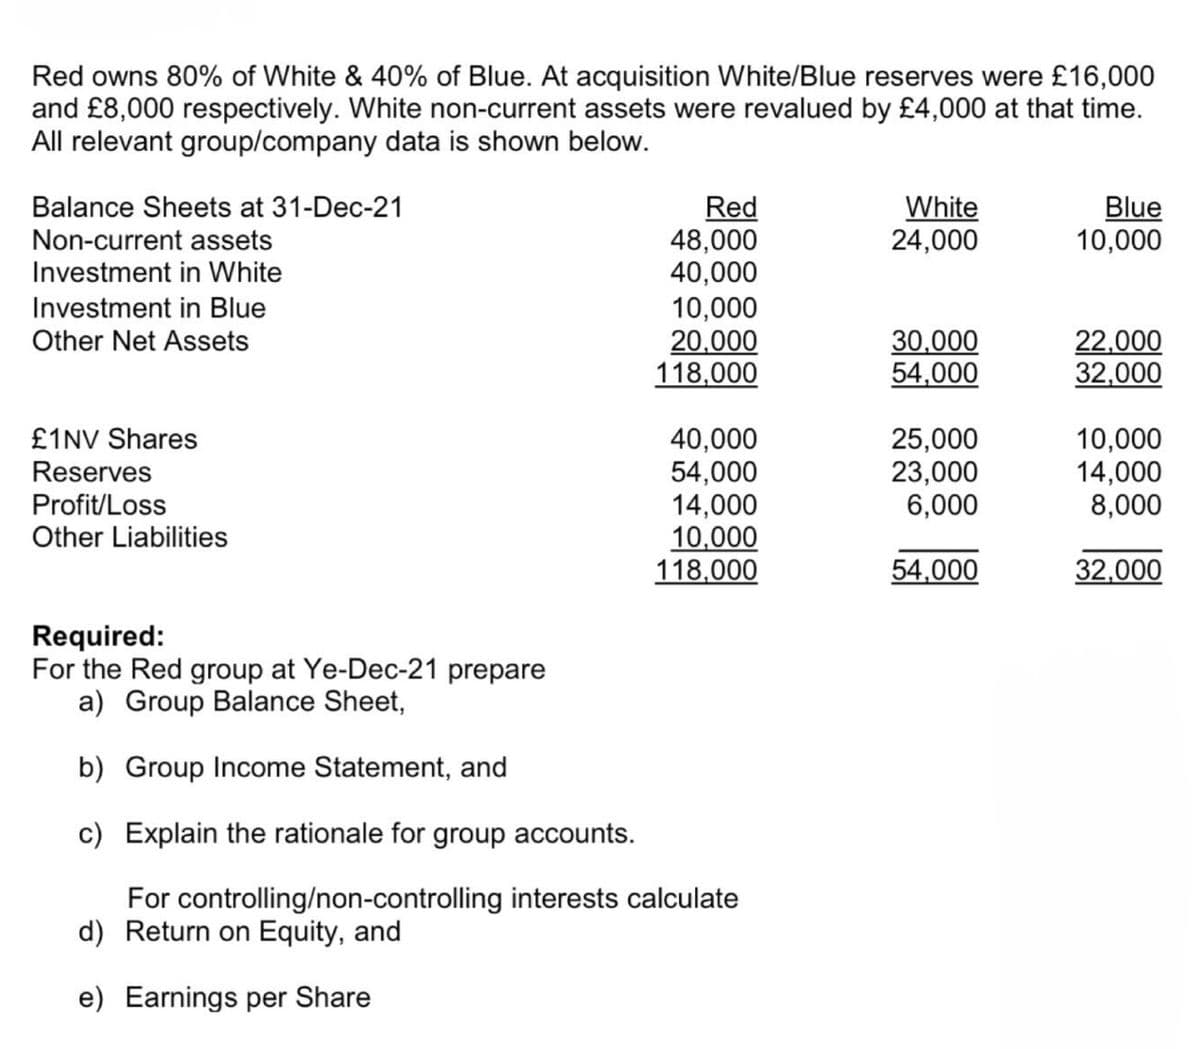 Red owns 80% of White & 40% of Blue. At acquisition White/Blue reserves were £16,000
and £8,000 respectively. White non-current assets were revalued by £4,000 at that time.
All relevant group/company data is shown below.
Balance Sheets at 31-Dec-21
Non-current assets
Investment in White
Investment in Blue
Other Net Assets
£1NV Shares
Reserves
Profit/Loss
Other Liabilities
Red
48,000
White
24,000
Blue
10,000
40,000
10,000
20,000
30,000
22,000
118,000
54,000
32,000
40,000
25,000
10,000
54,000
23,000
14,000
14,000
6,000
8,000
10,000
118,000
54,000
32,000
Required:
For the Red group at Ye-Dec-21 prepare
a) Group Balance Sheet,
b) Group Income Statement, and
c) Explain the rationale for group accounts.
For controlling/non-controlling interests calculate
d) Return on Equity, and
e) Earnings per Share